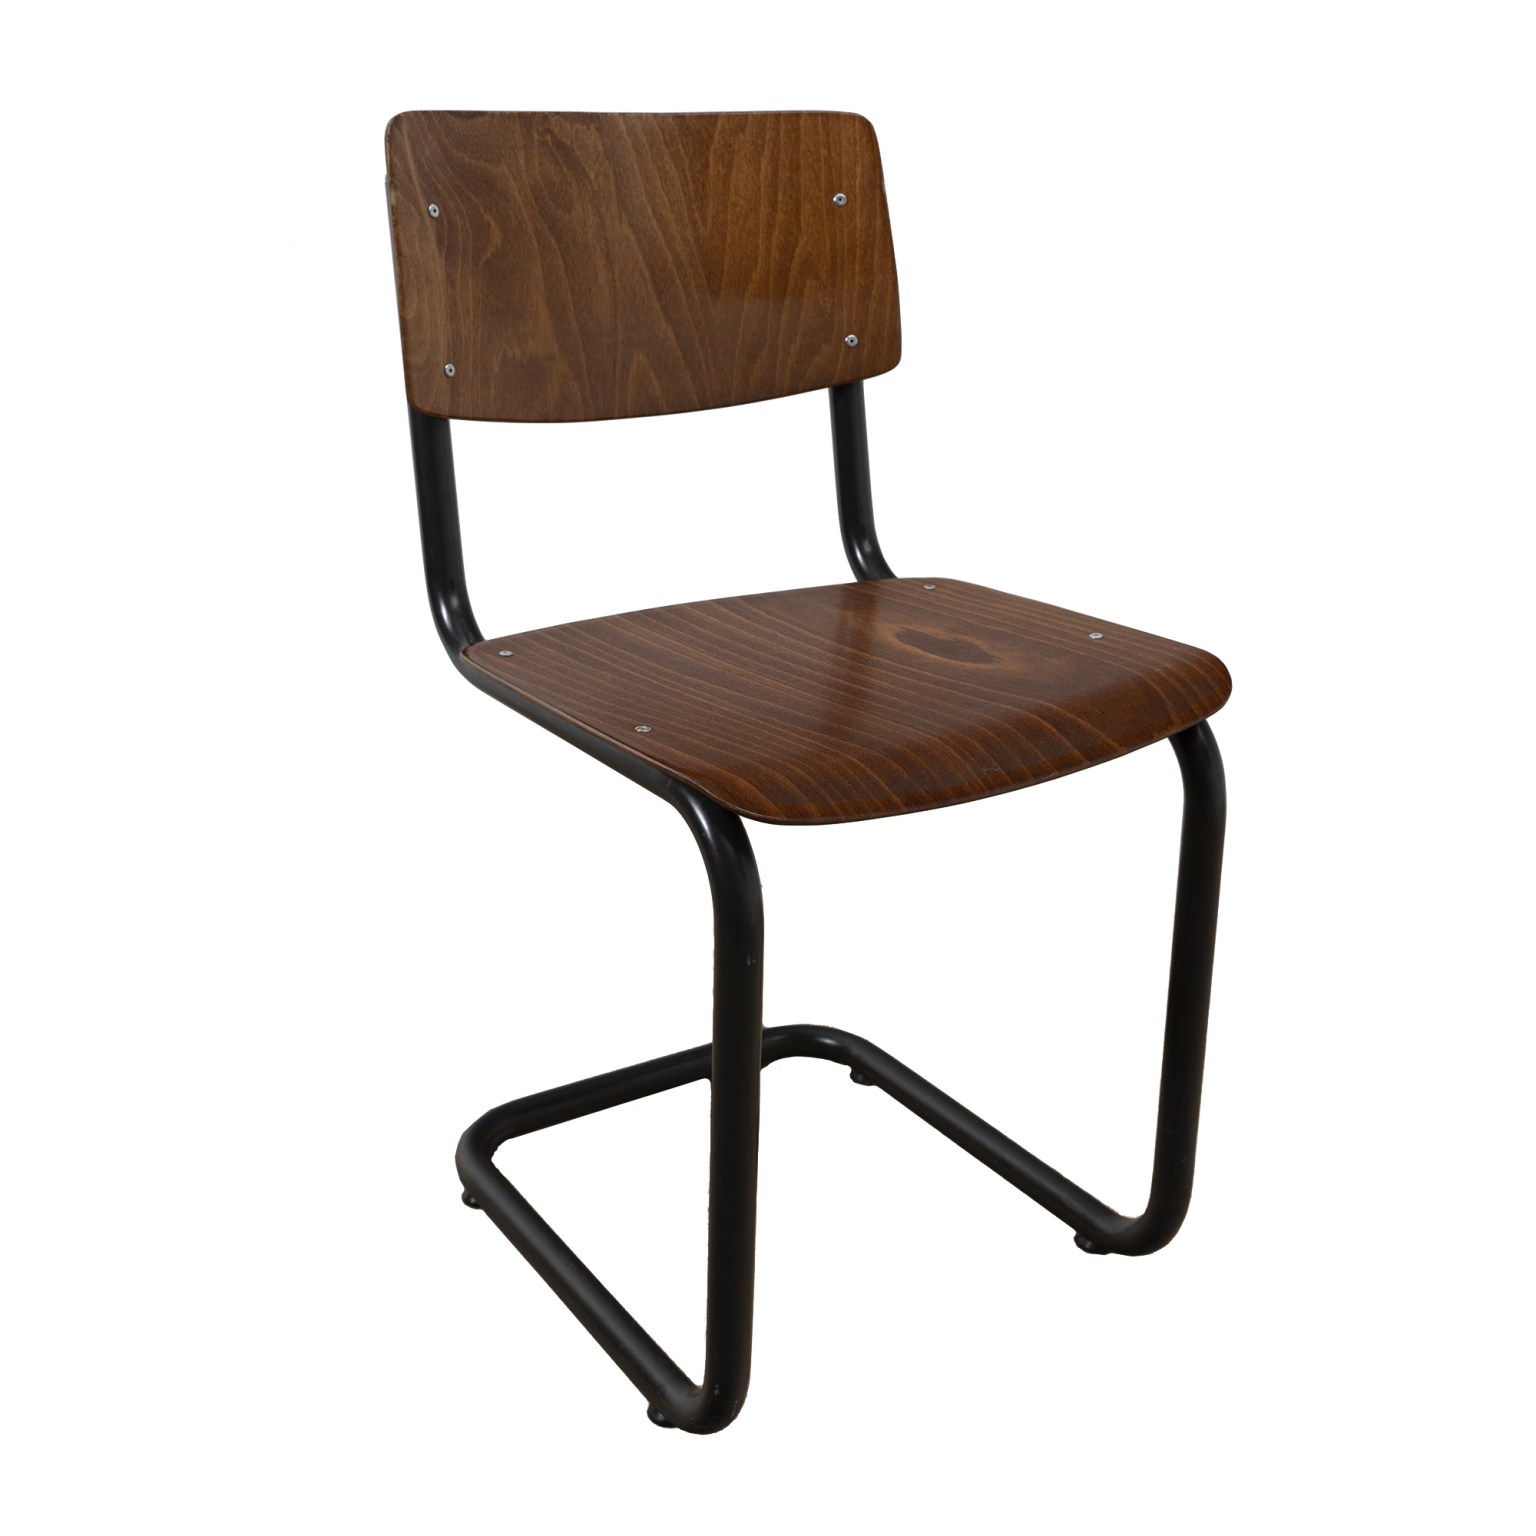 100x Industrial chair tubular frame (Grey - Brown) | Howaboutout ...